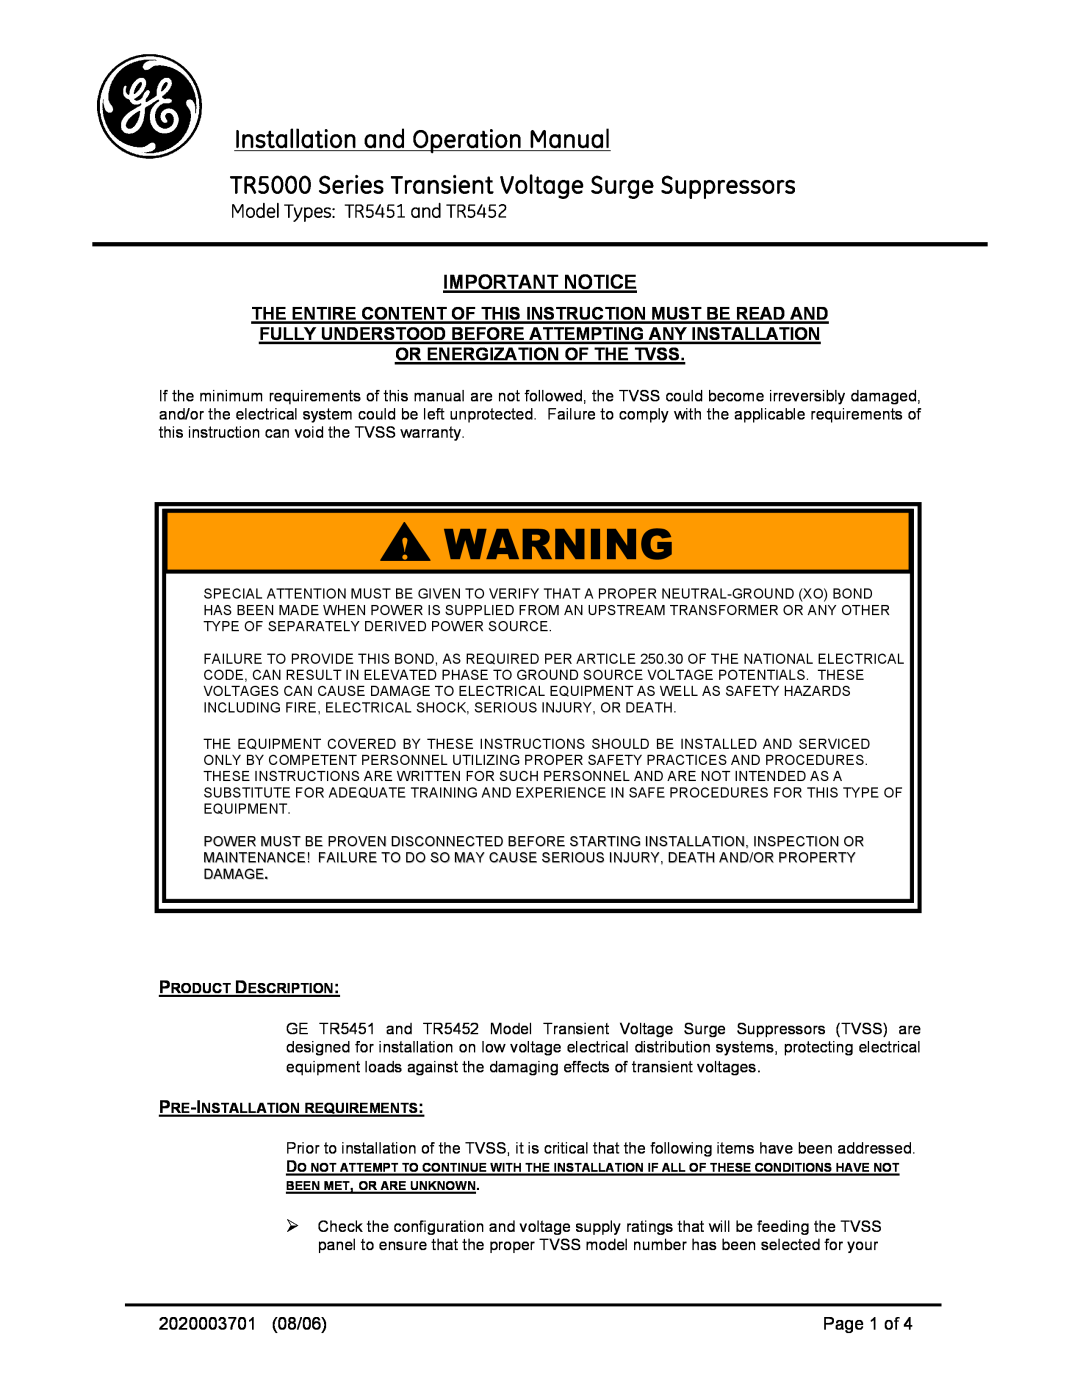 GE TR5452, TR5451 operation manual Important Notice, 2020003701 08/06, Page 1 of, Installation and Operation Manual 